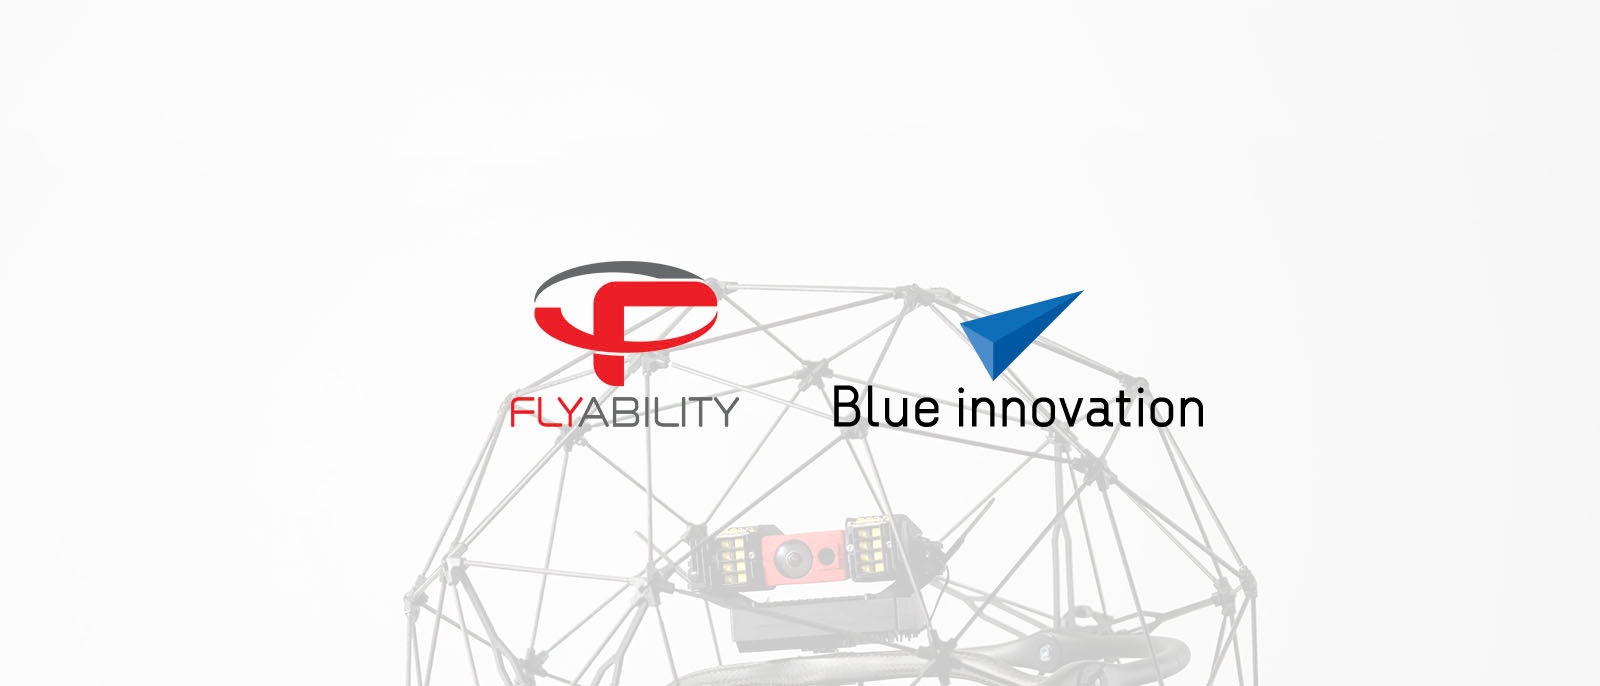 Blue innovation and Flyability form business partnership to bring indoor inspection to the Japanese market